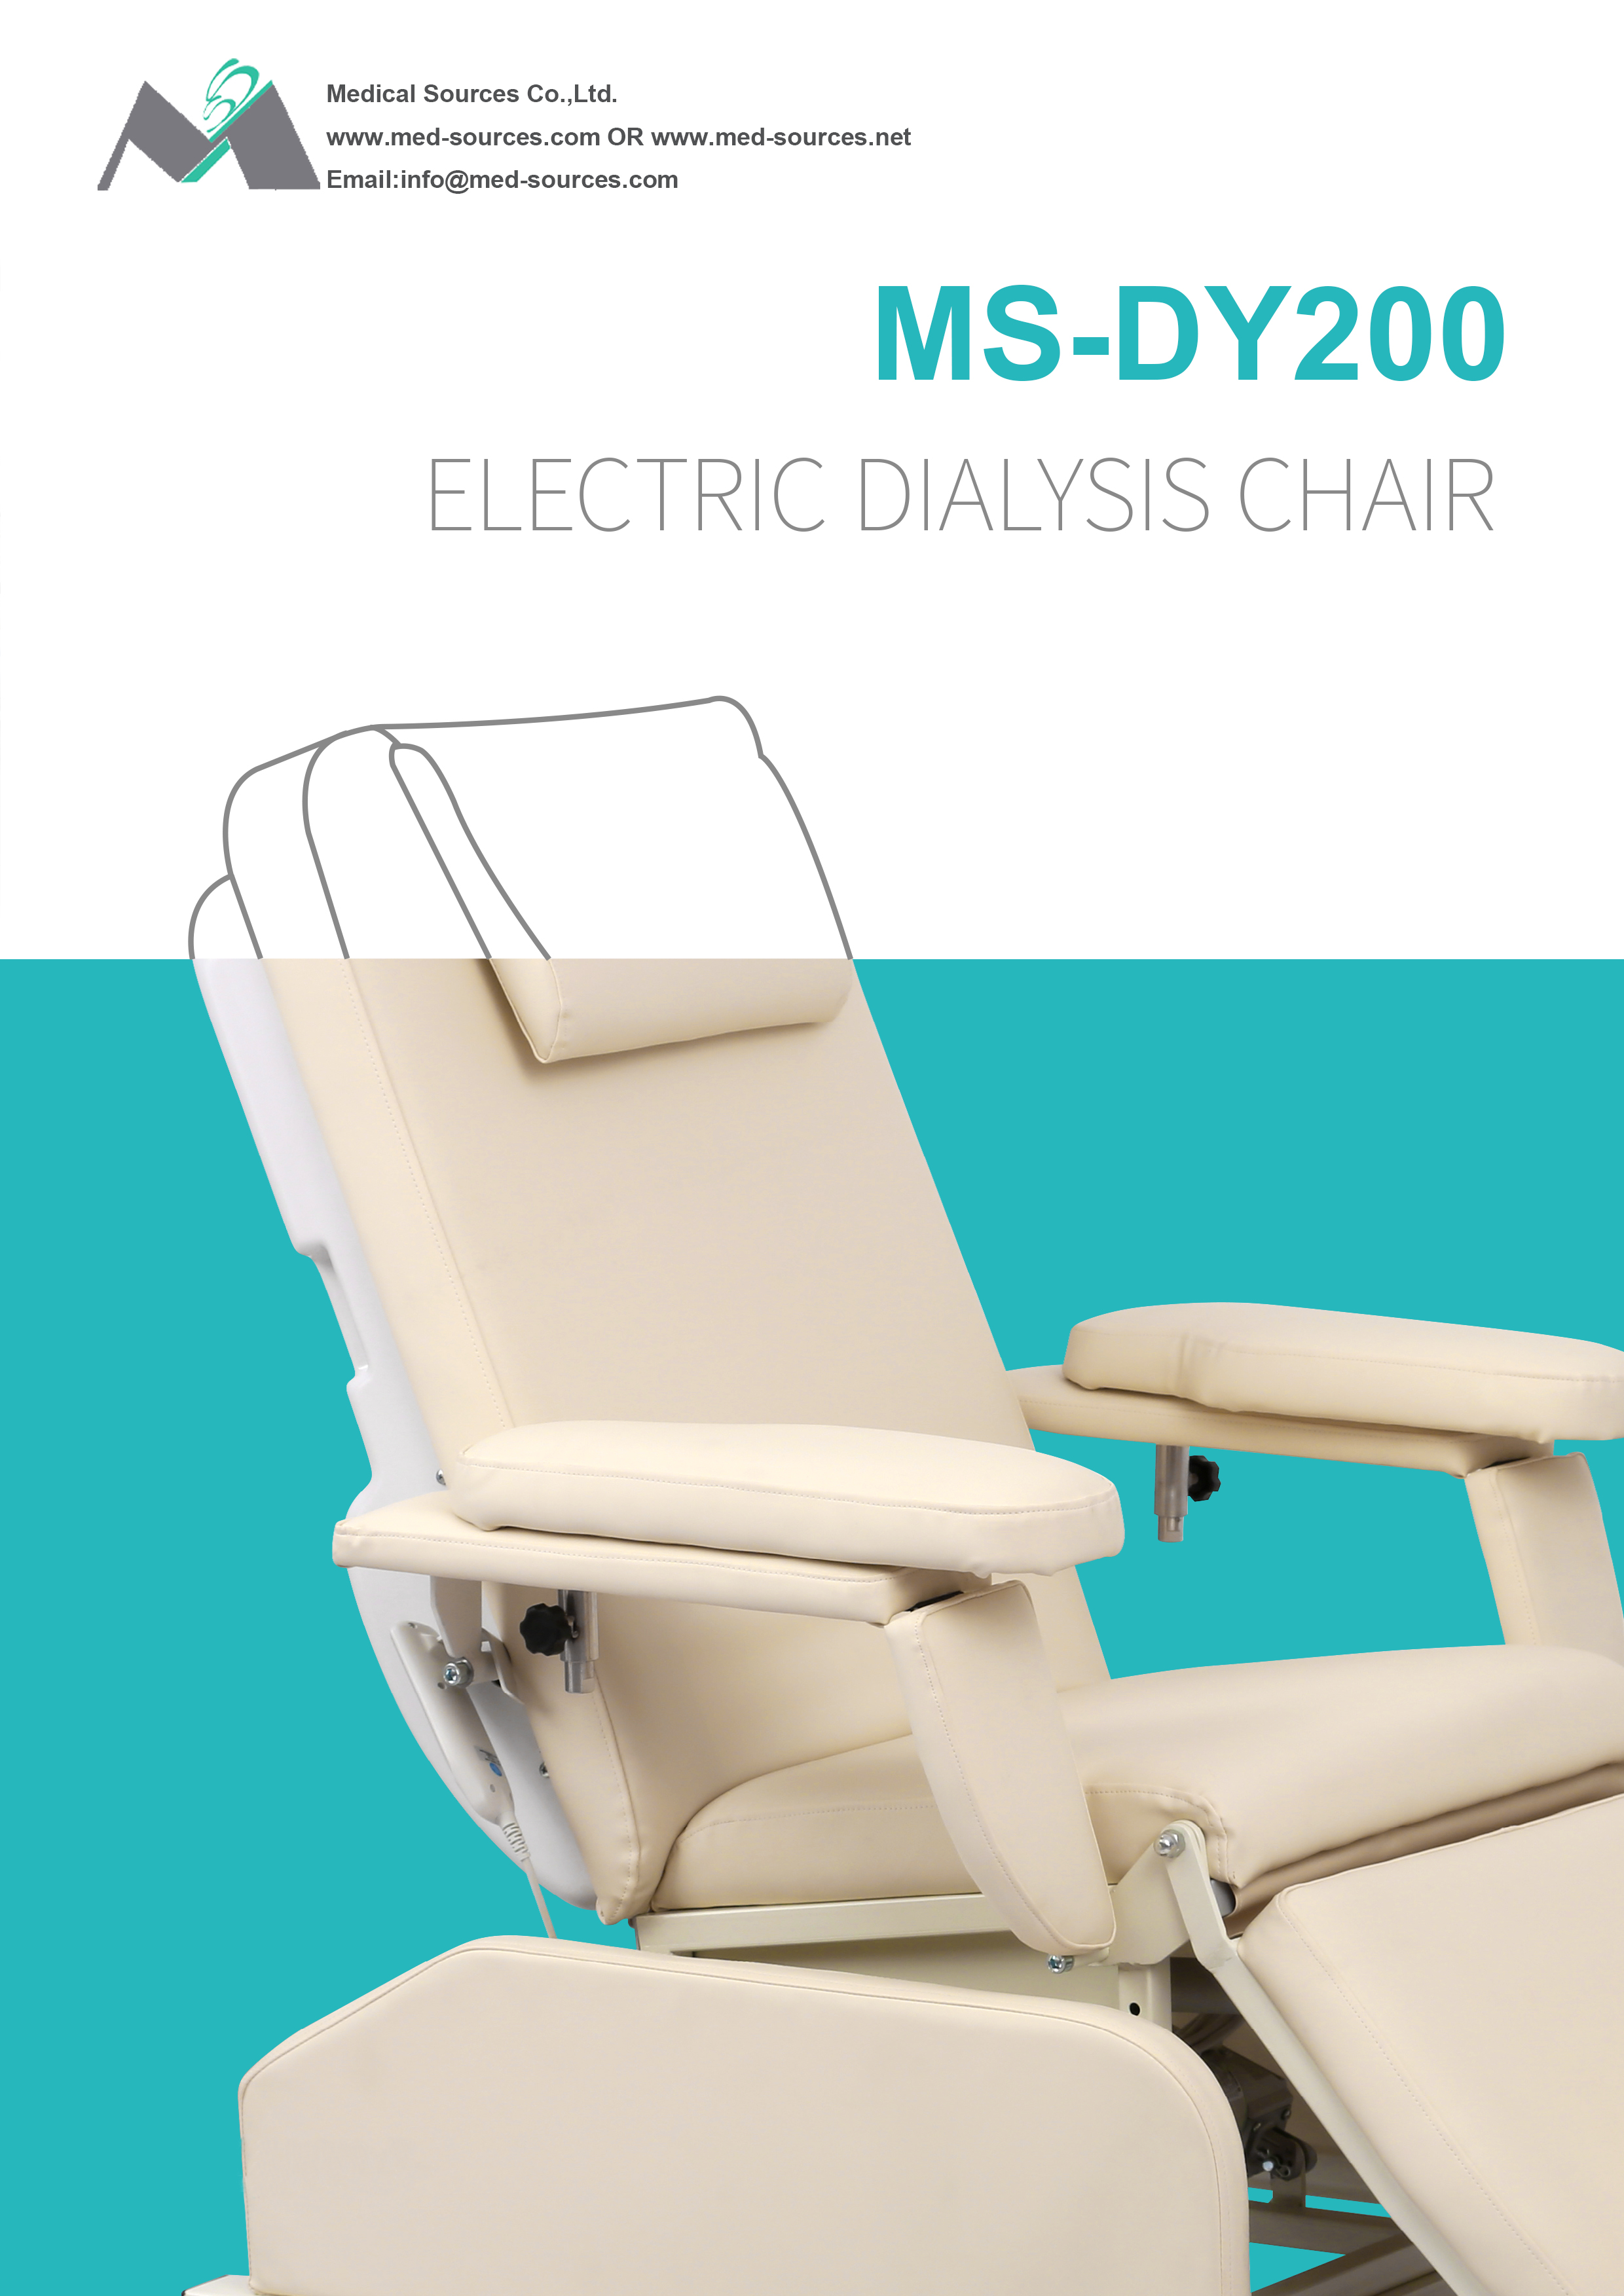 MS-DY200 Electric Dialysis Chair-1